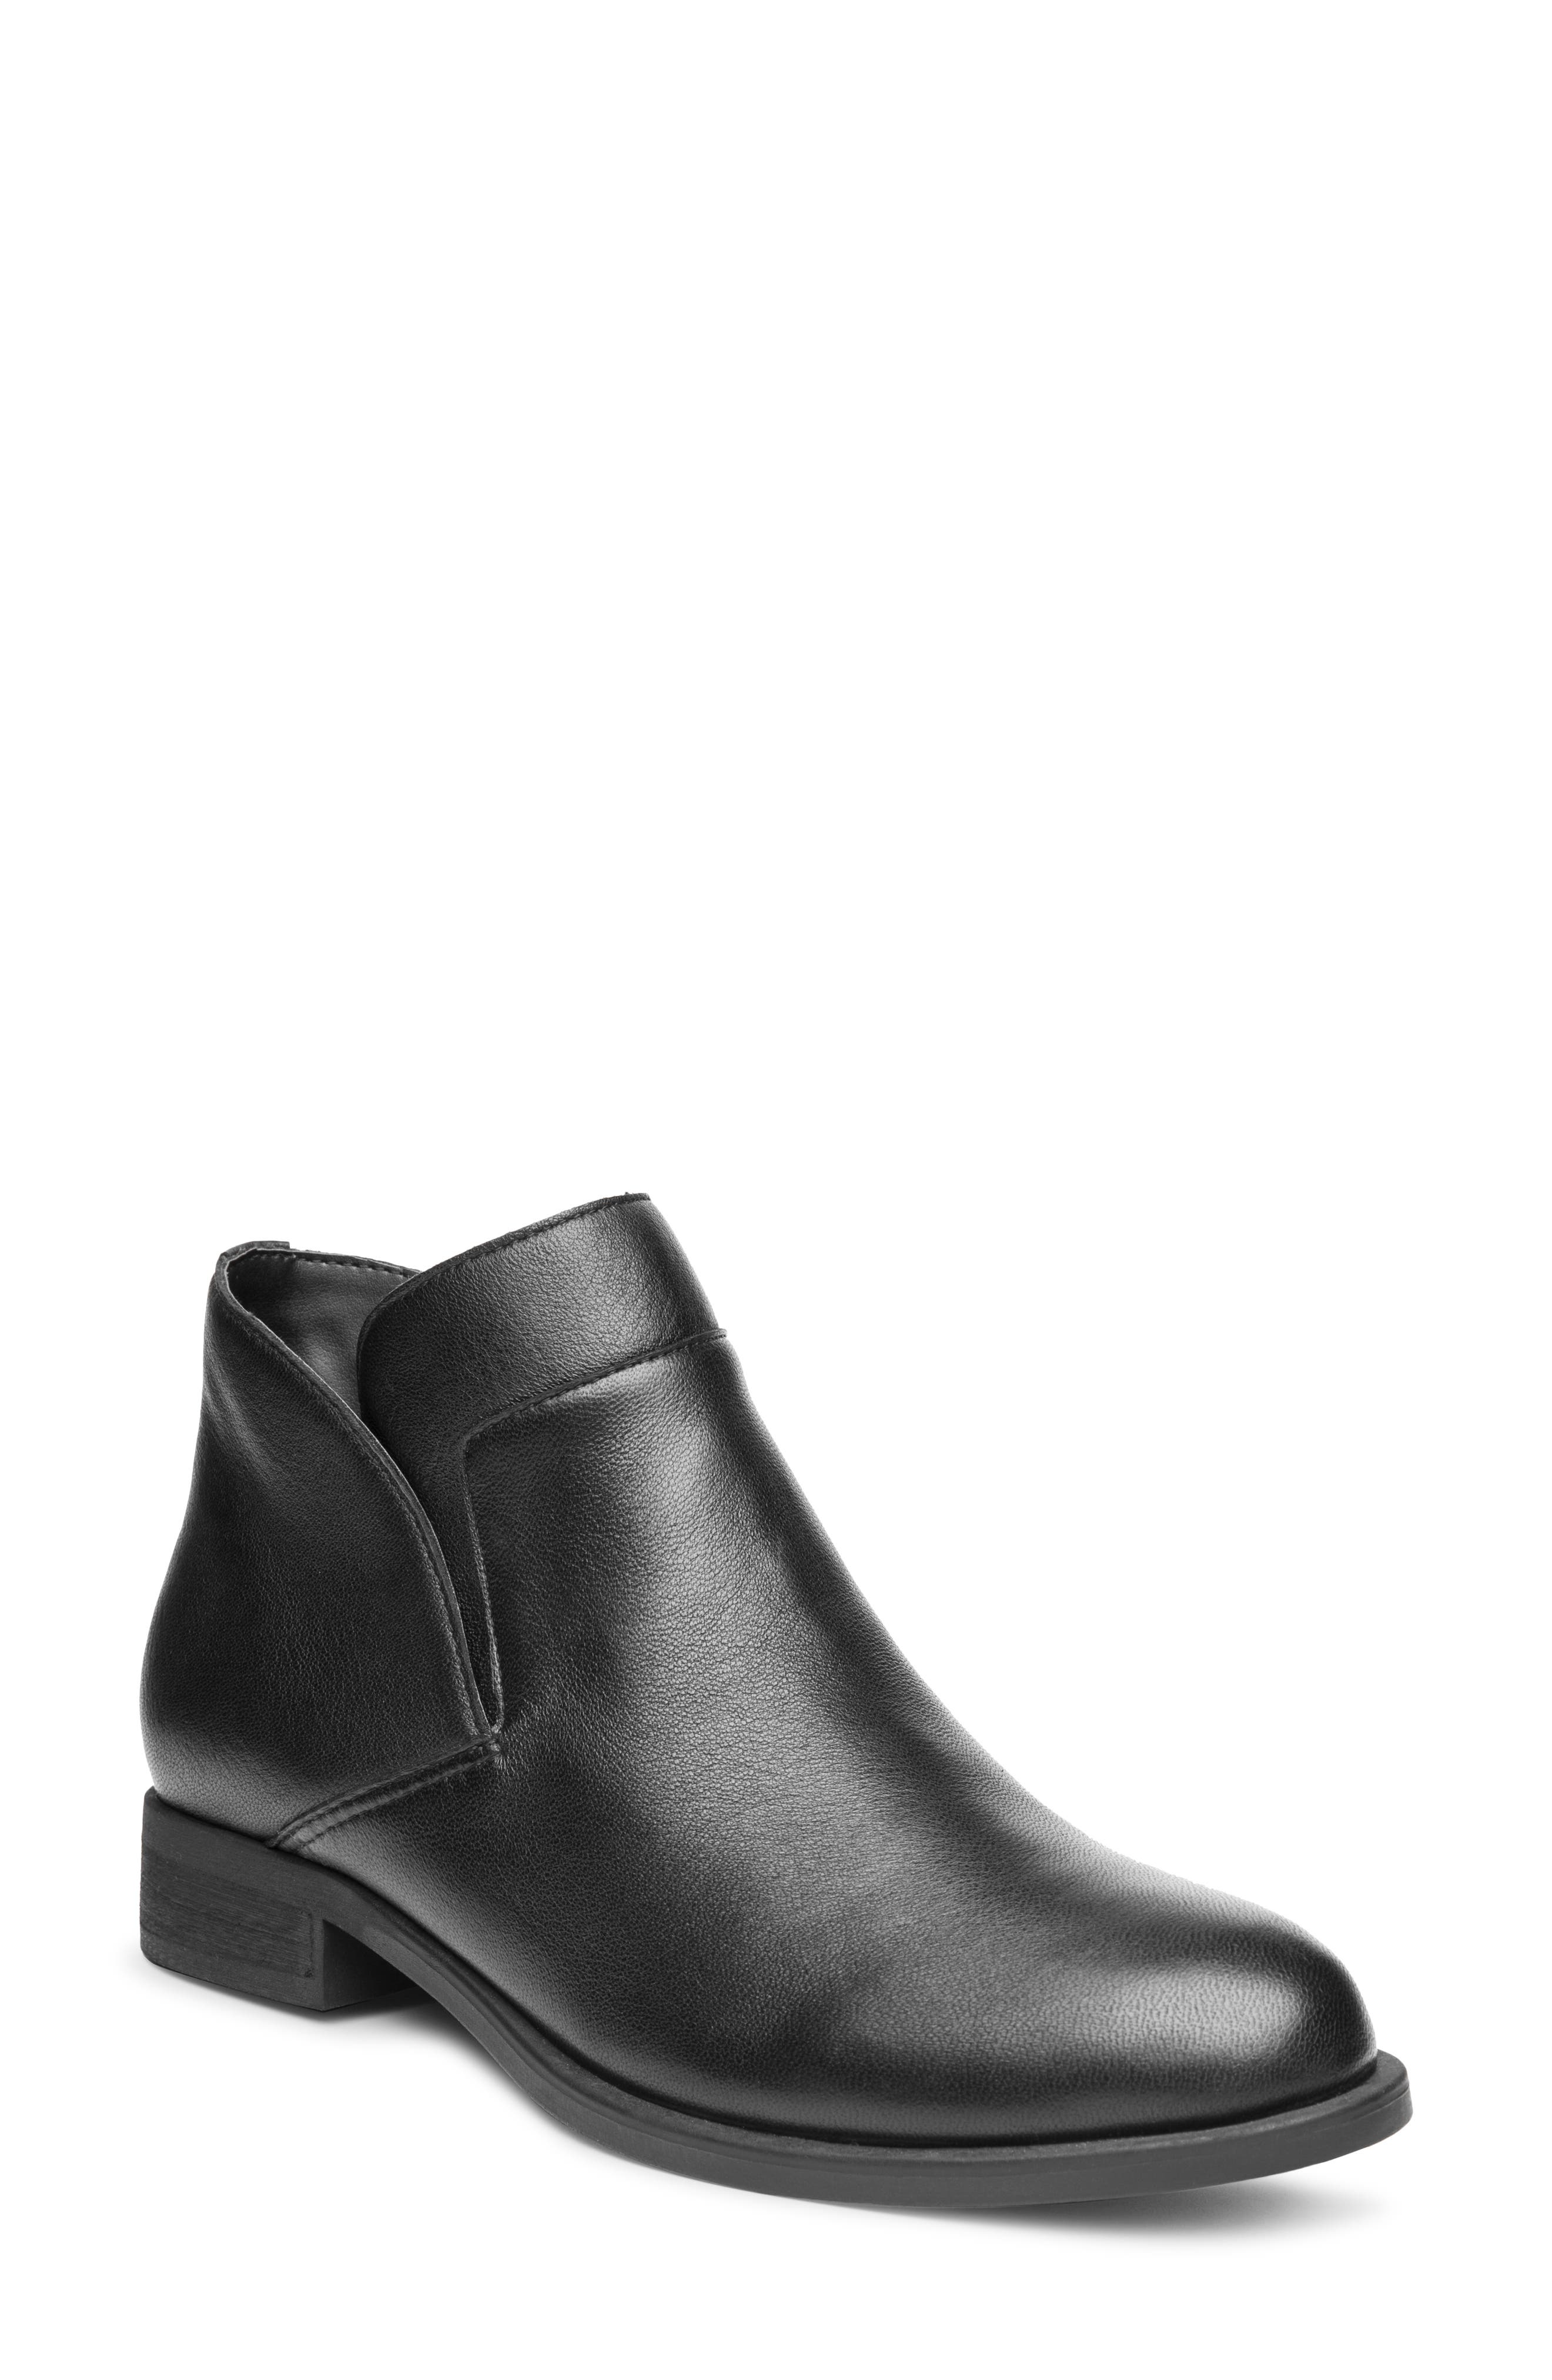 ankle boots near me